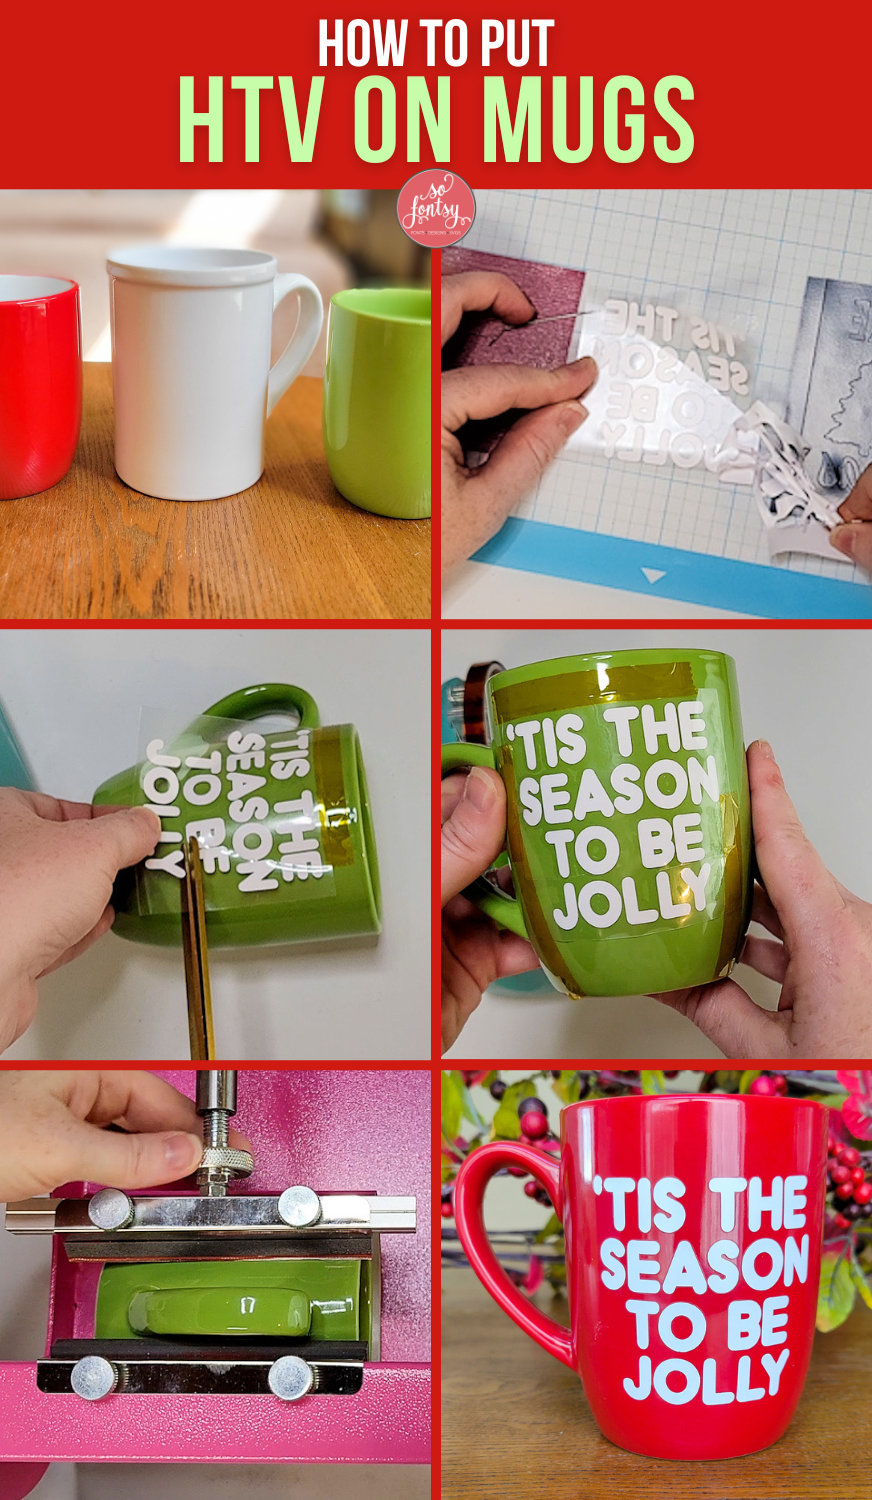 How to Use Printable Vinyl with Coffee Mugs - So Fontsy